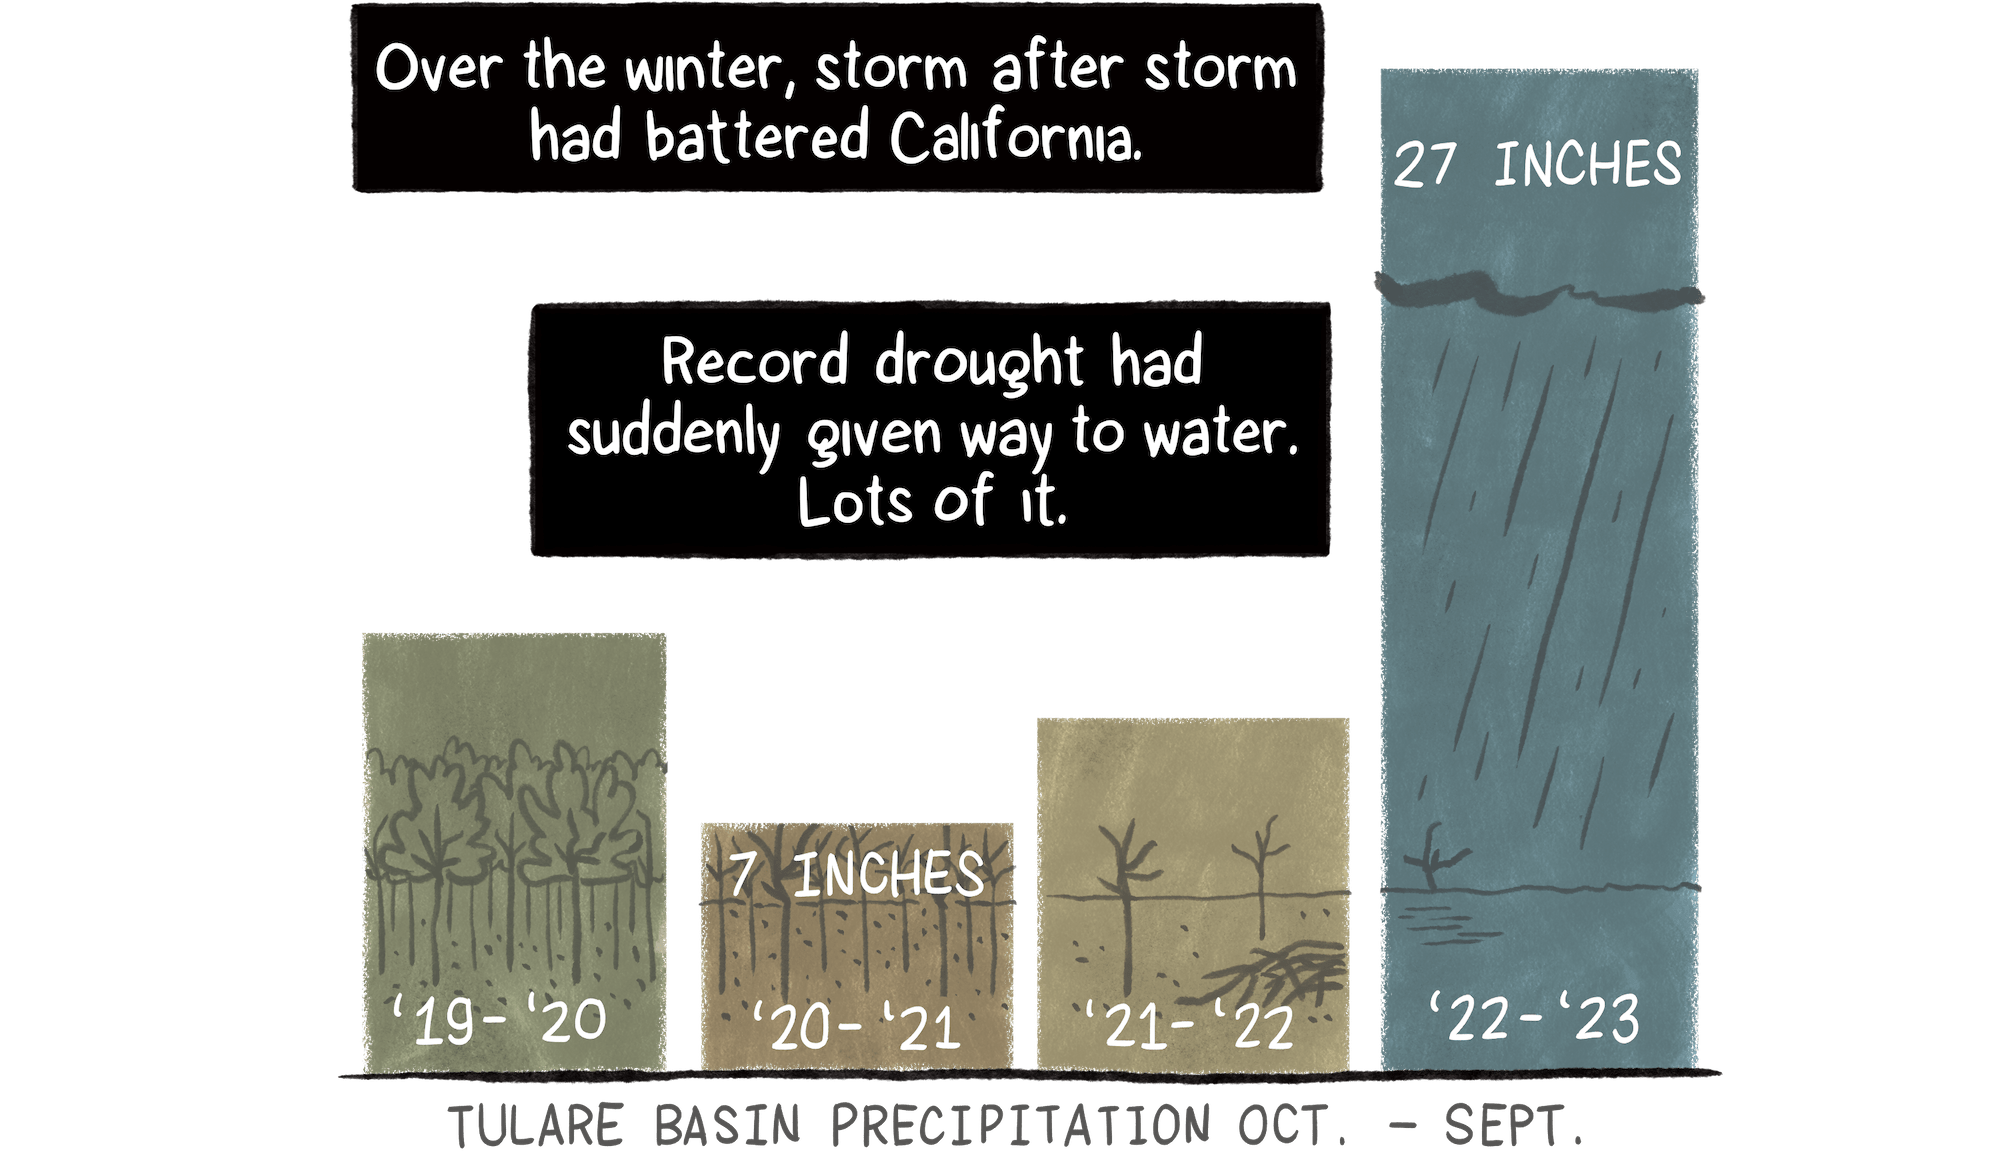 Over the winter, storms had battered the state. A bar chart shows the extreme precipitation of 27 inches from October 2022 to September 2023, surpassing recent years when there had been a drought by as much as 20 inches.